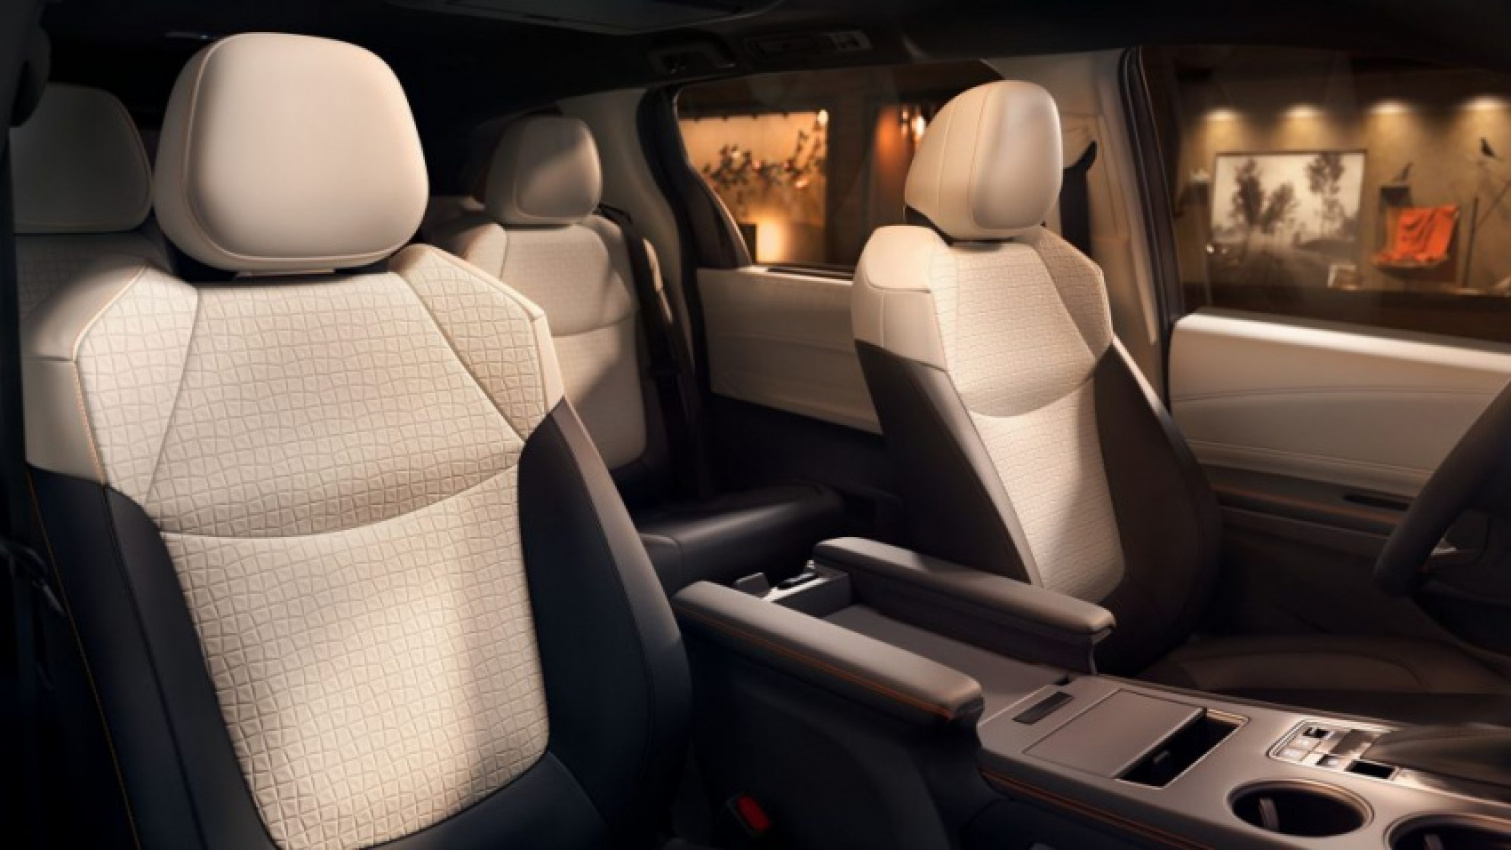 android, autos, cars, toyota, amazon, hybrid, sienna, toyota sienna, amazon, android, the 2022 toyota sienna is perfect for family road trips